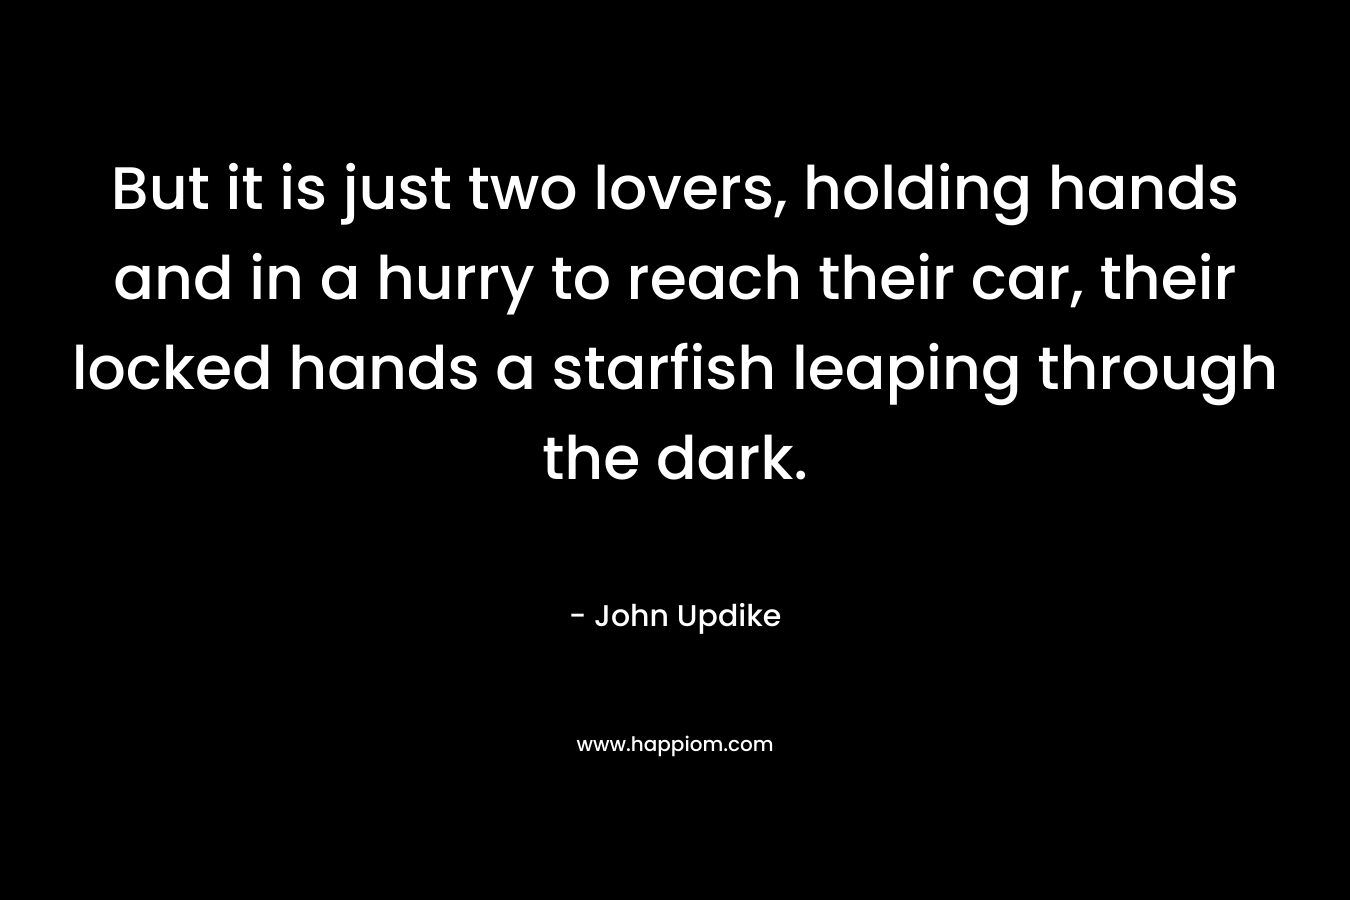 But it is just two lovers, holding hands and in a hurry to reach their car, their locked hands a starfish leaping through the dark. – John Updike